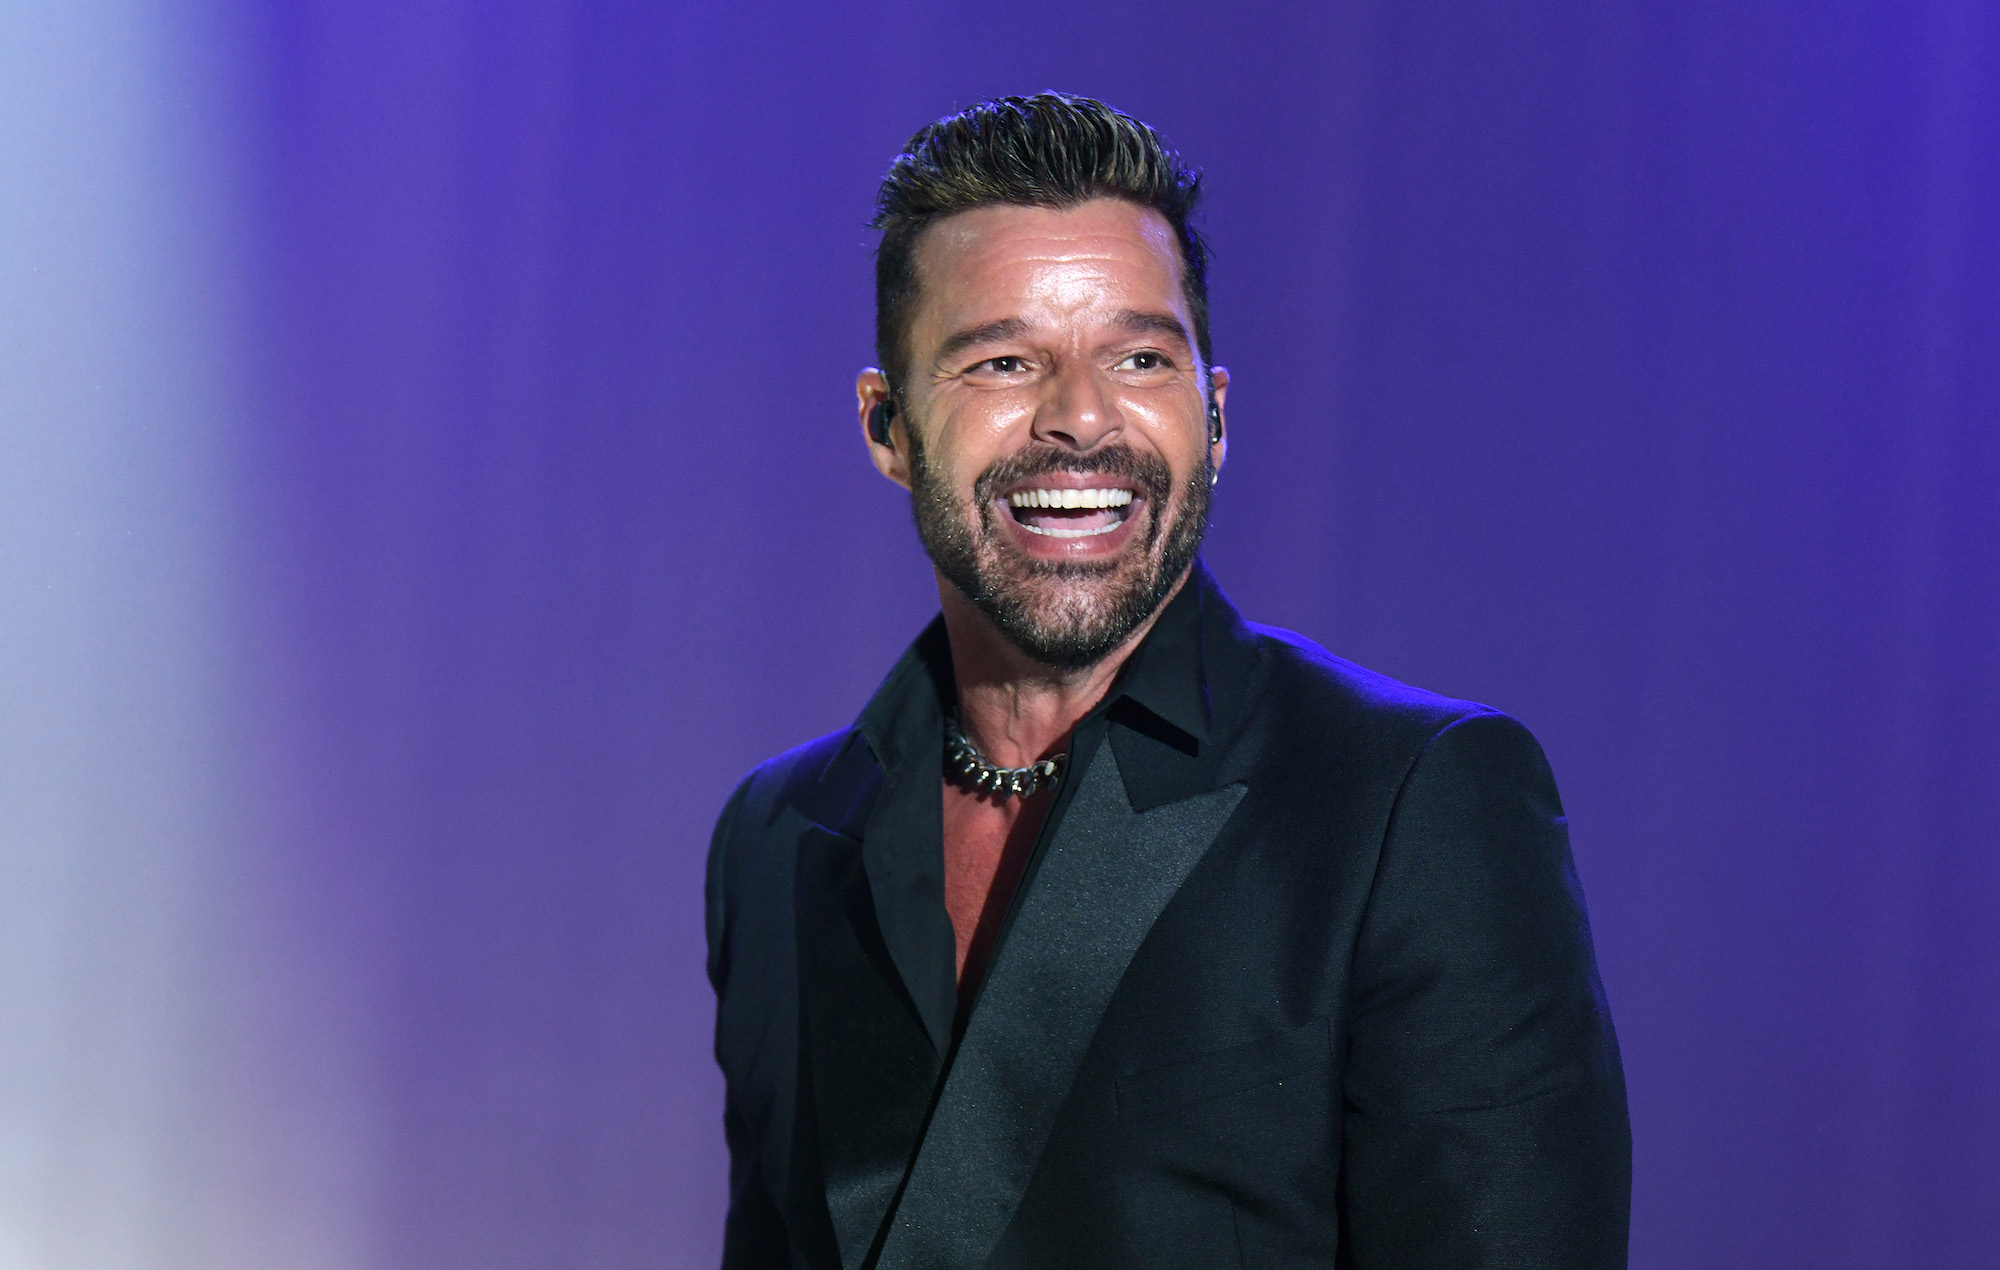 See what happened next when Ricky Martin twins surprises him on stage, Video Goes viral